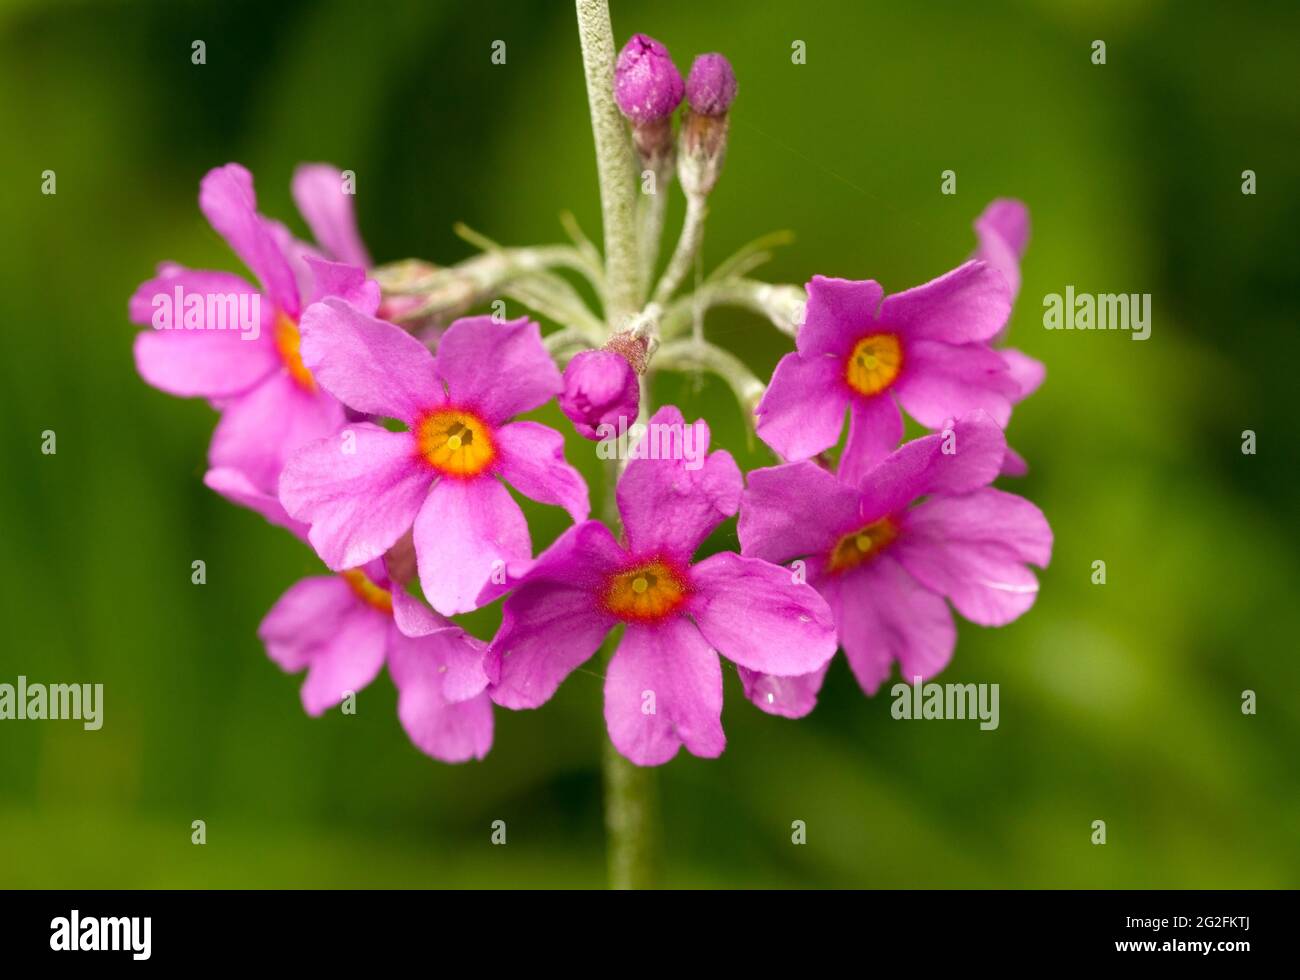 A delicate Primula flower, one of the many varieties now developed by horticulturalists from the Primrose family. Stock Photo